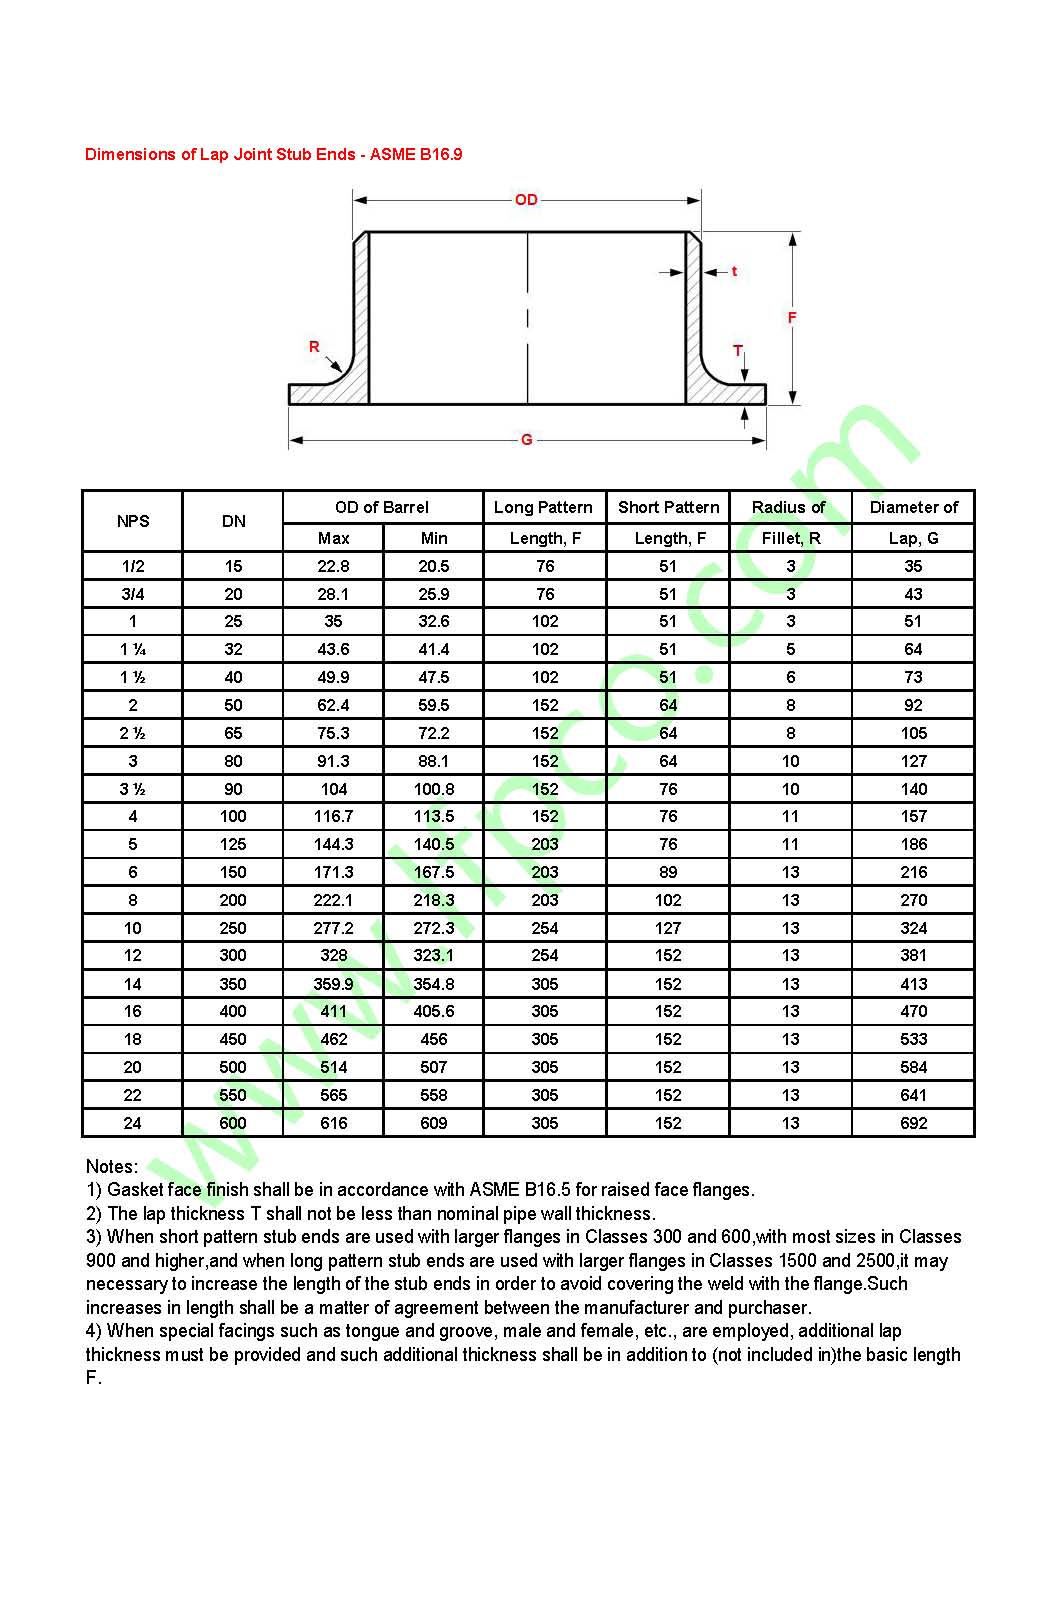 Dimensions of Lap Joint Stub Ends - ASME B16.9